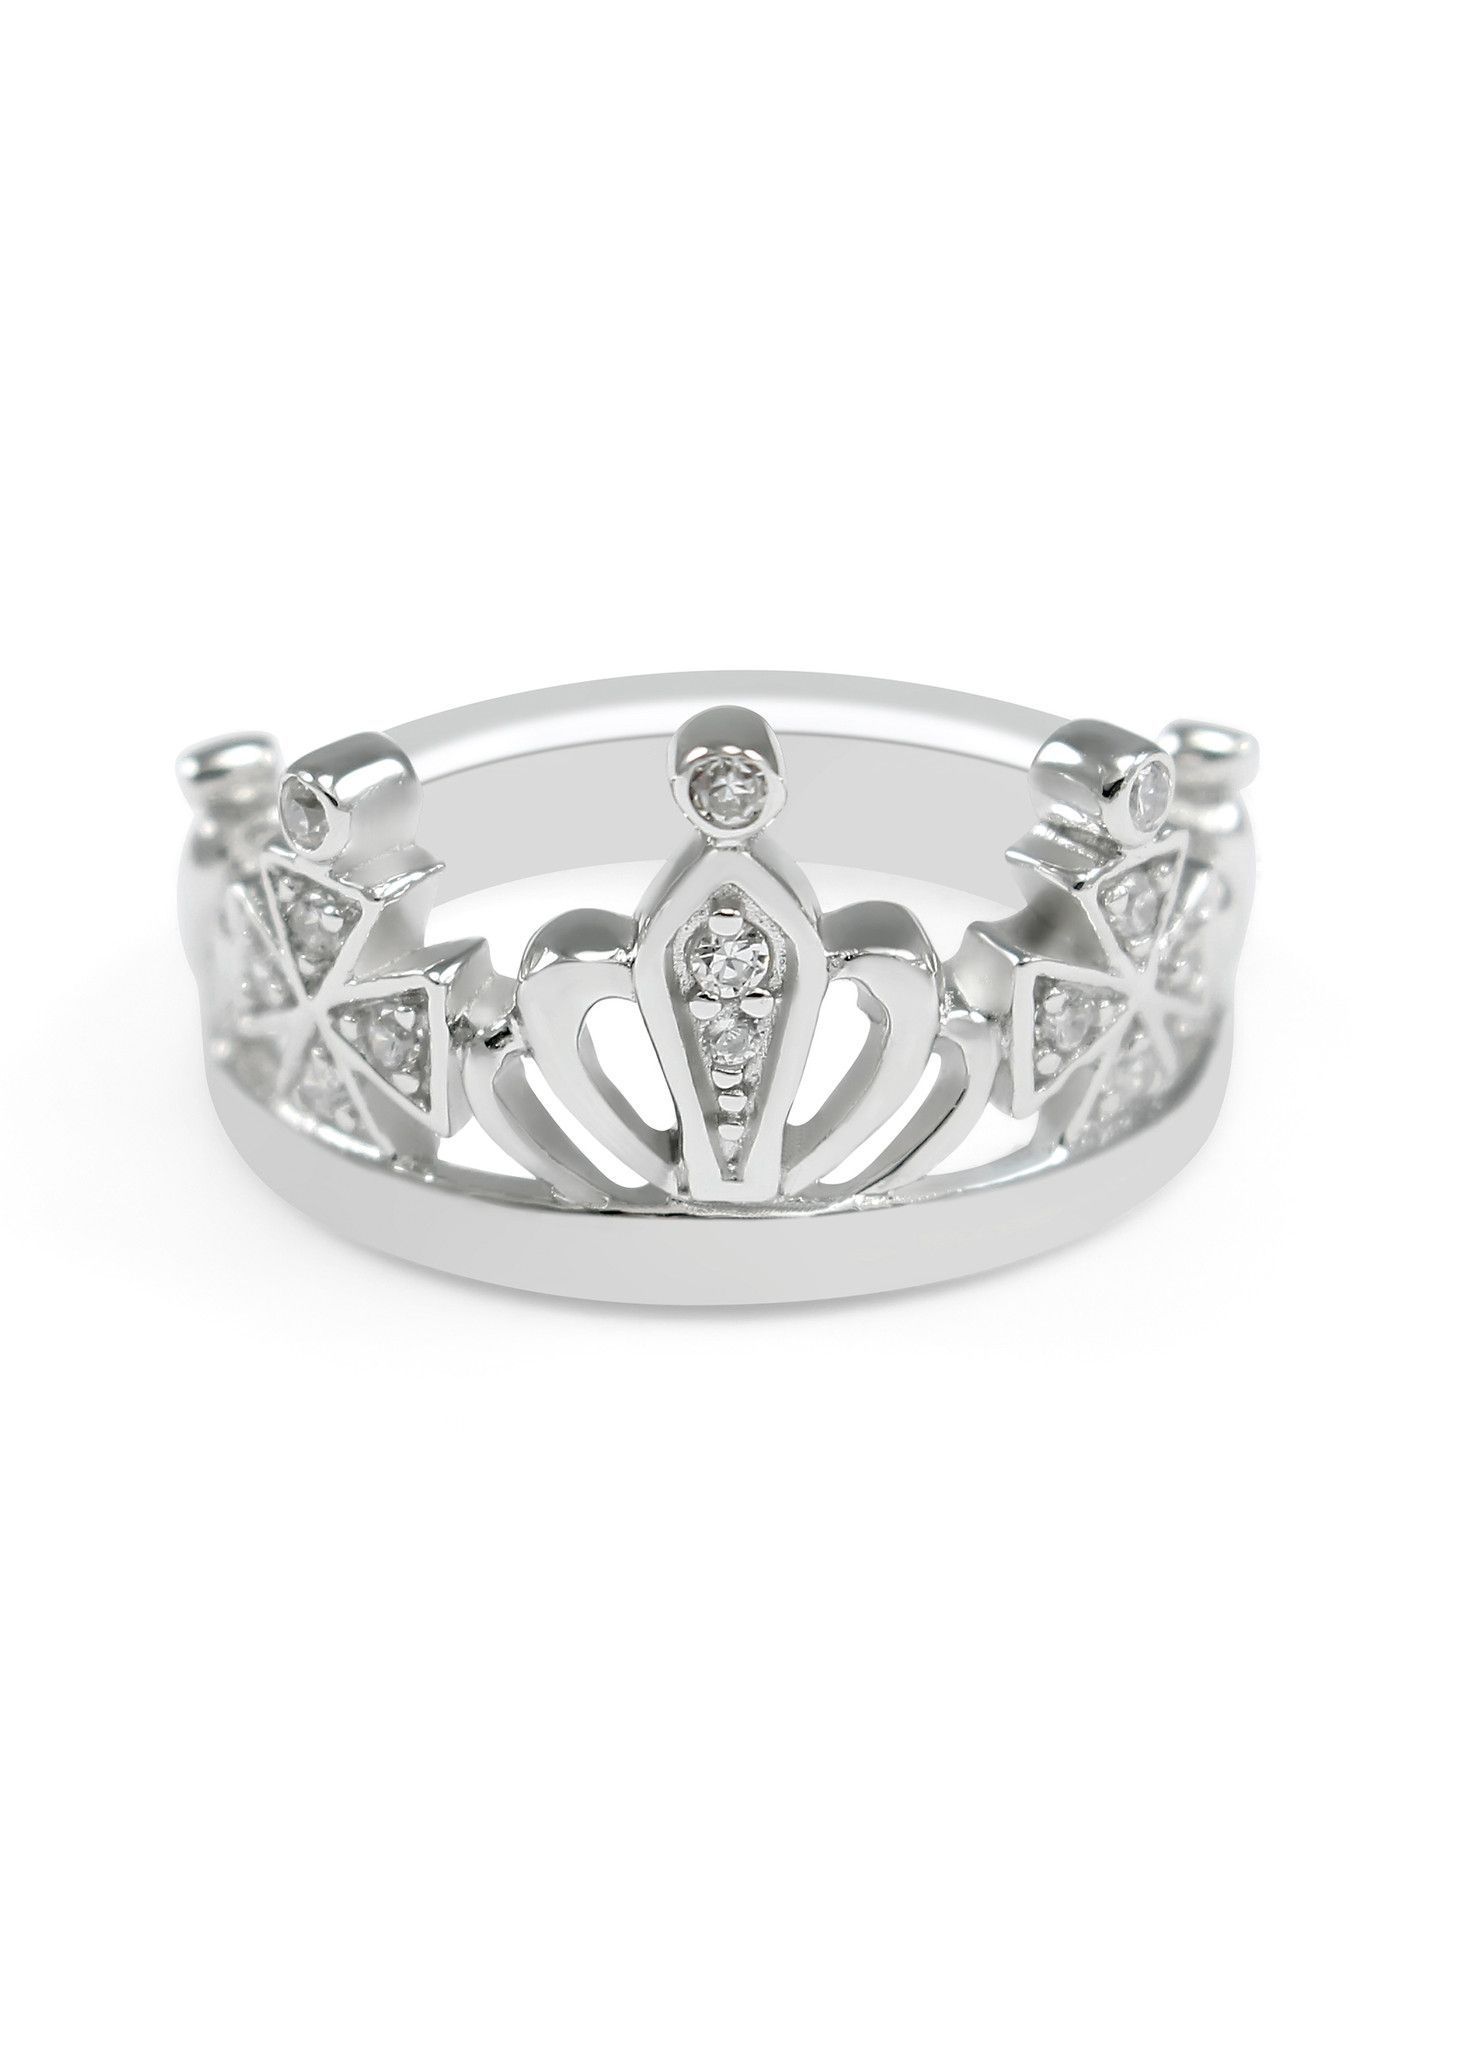 Zeta Tau Alpha Sterling Silver Crown Ring With Czs | Purchase In Latest Black Sparkling Crown Rings (View 11 of 25)